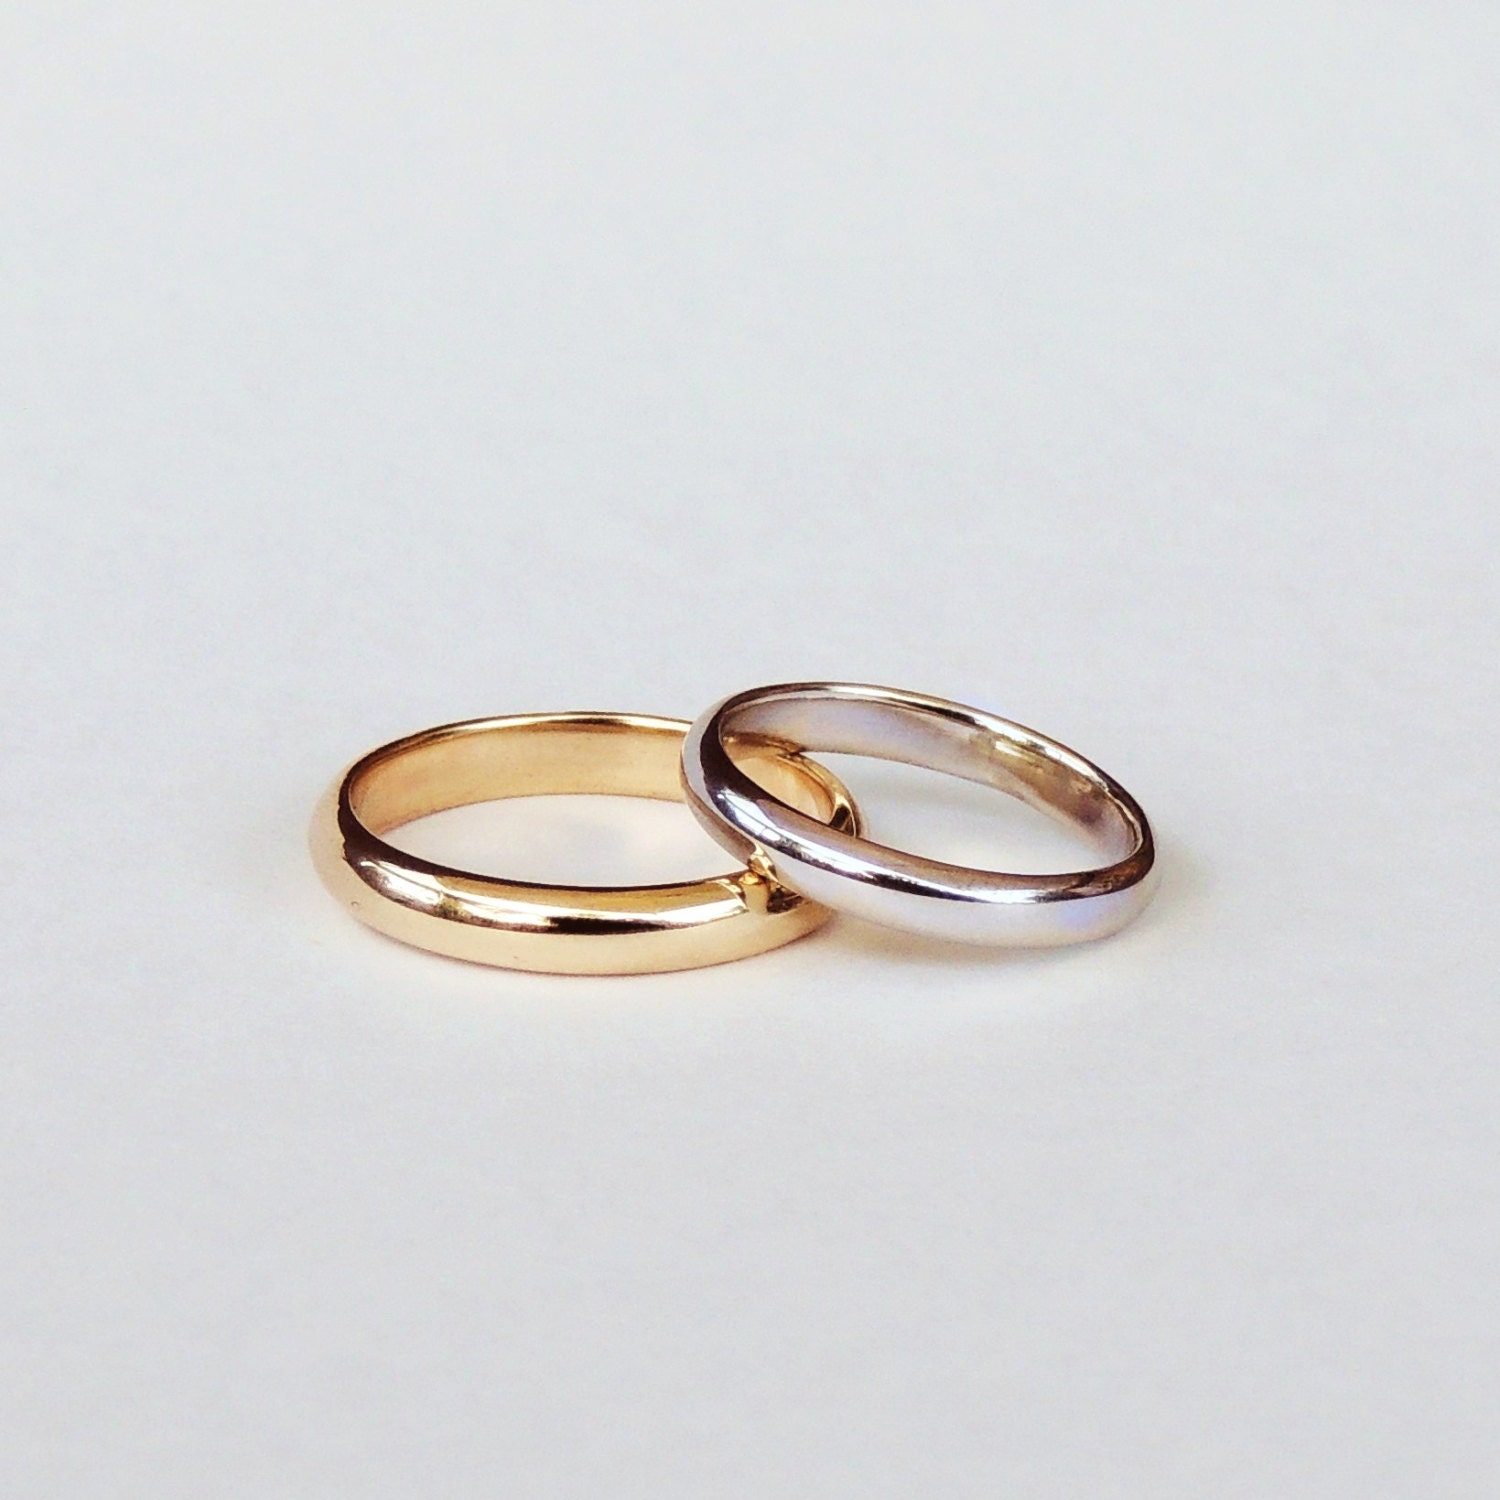 Wedding Band Simple and Elegant Wedding band for Him and Her